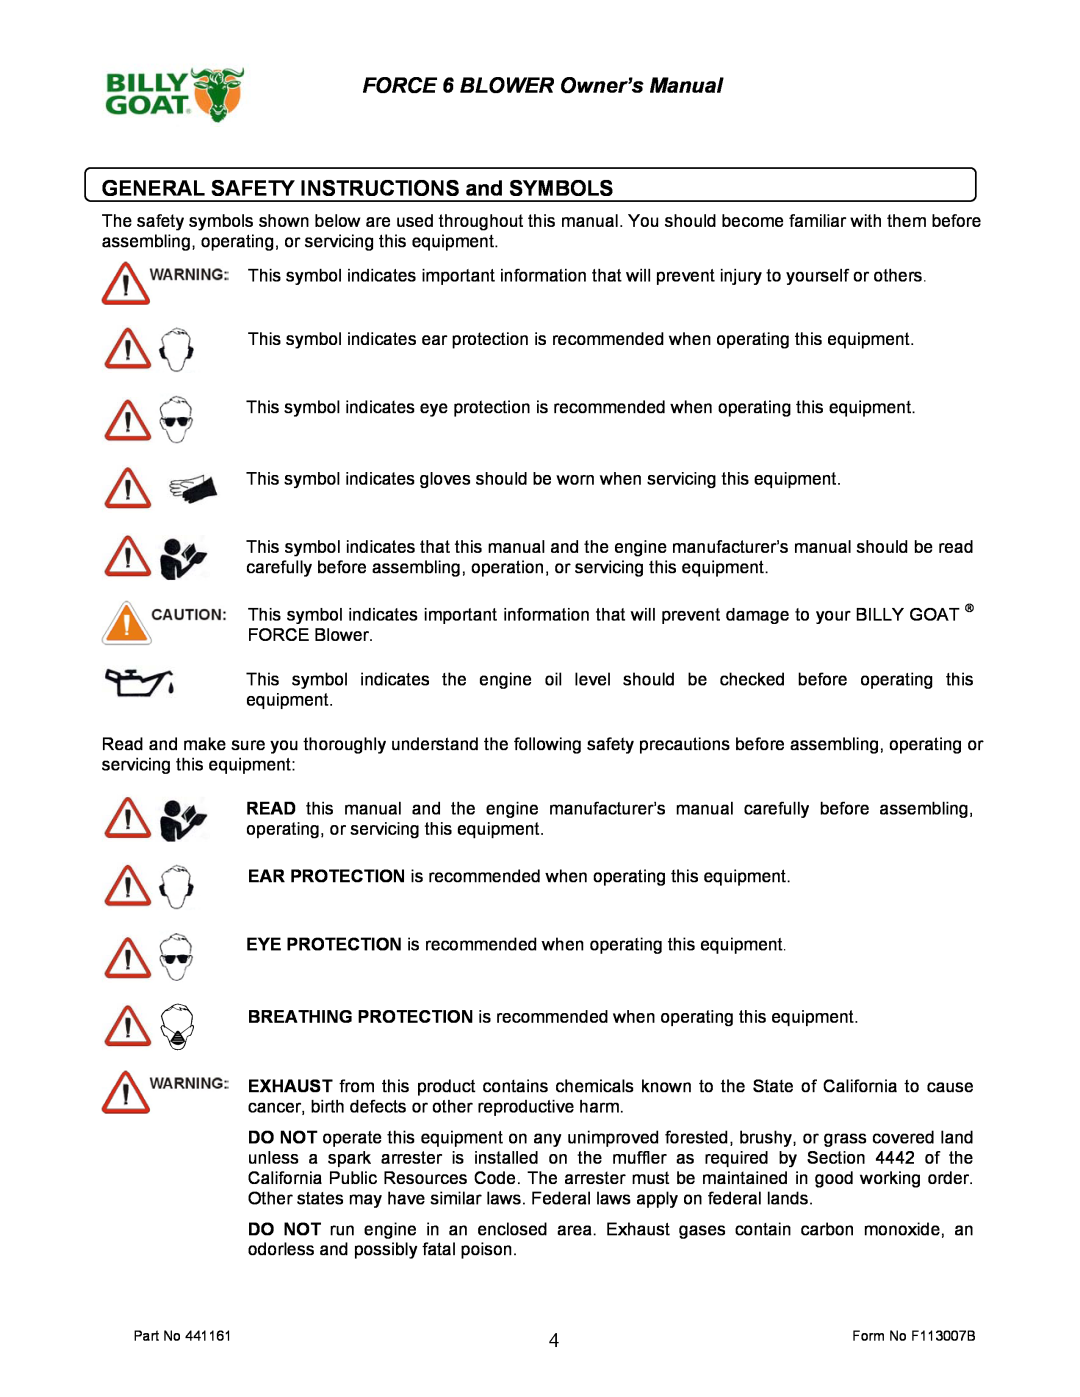 Billy Goat F601S owner manual GENERAL SAFETY INSTRUCTIONS and SYMBOLS 